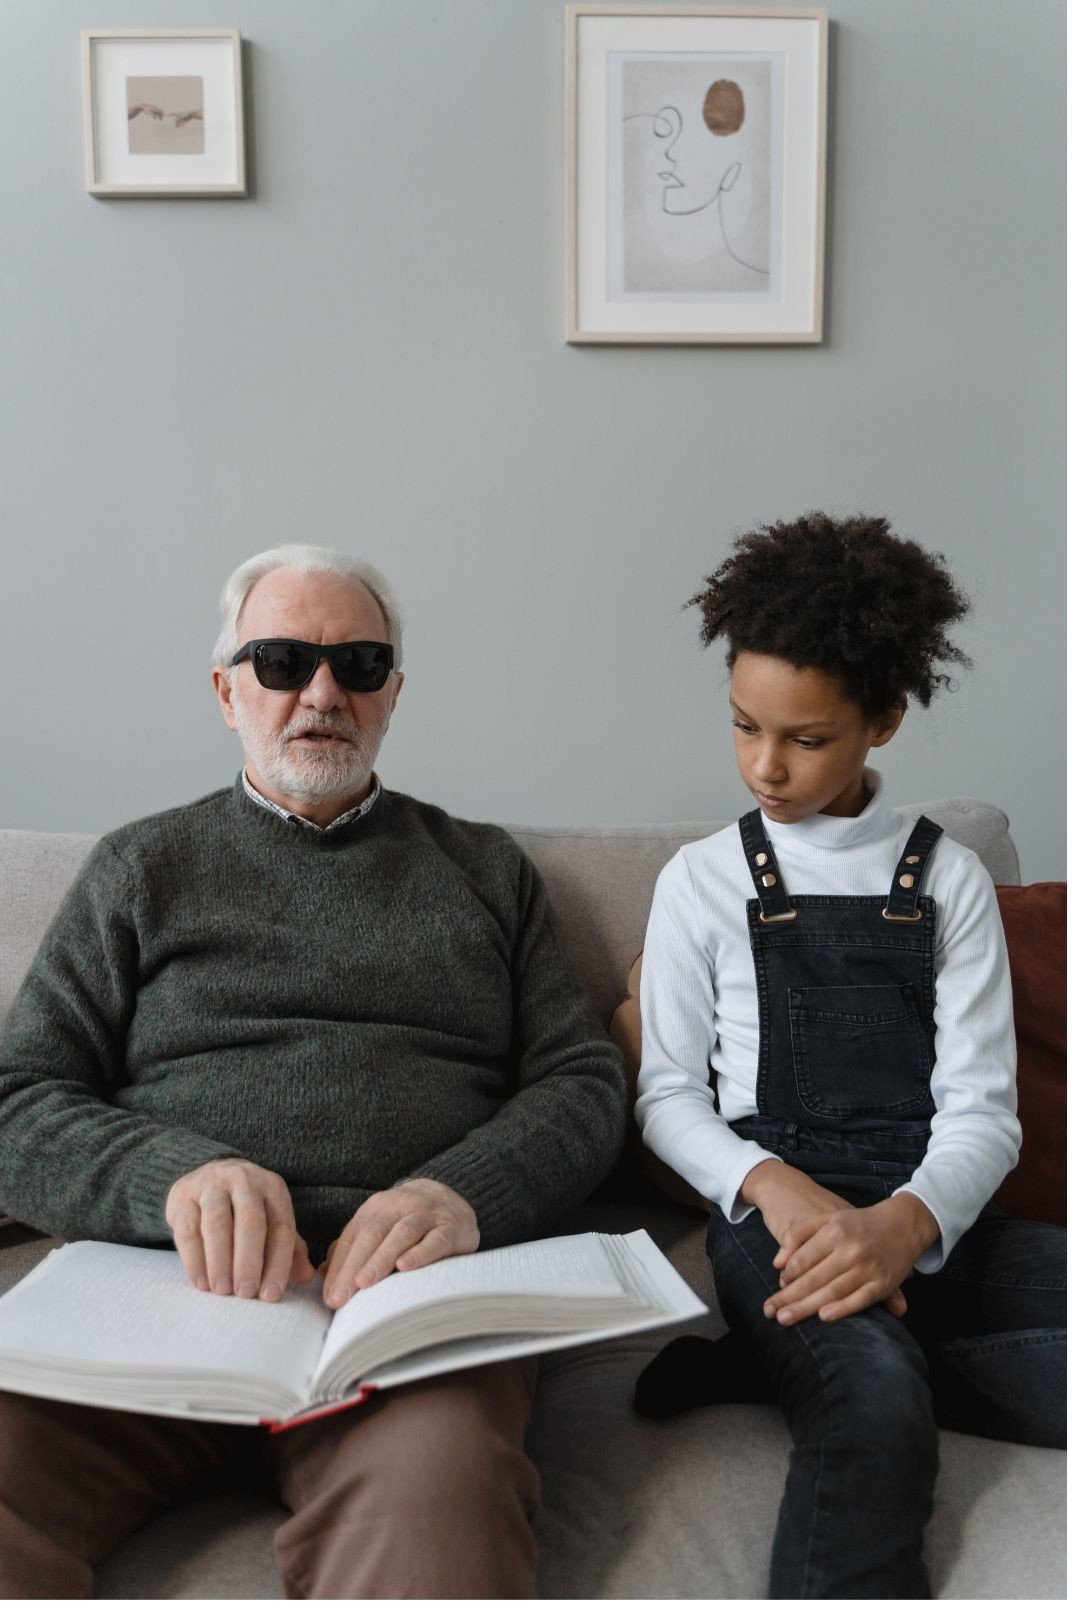 A man with a white beard and dark glasses is sitting on a sofa. Next to him is a young girl aged around 10. He is holding a Braille book and is reading to her.